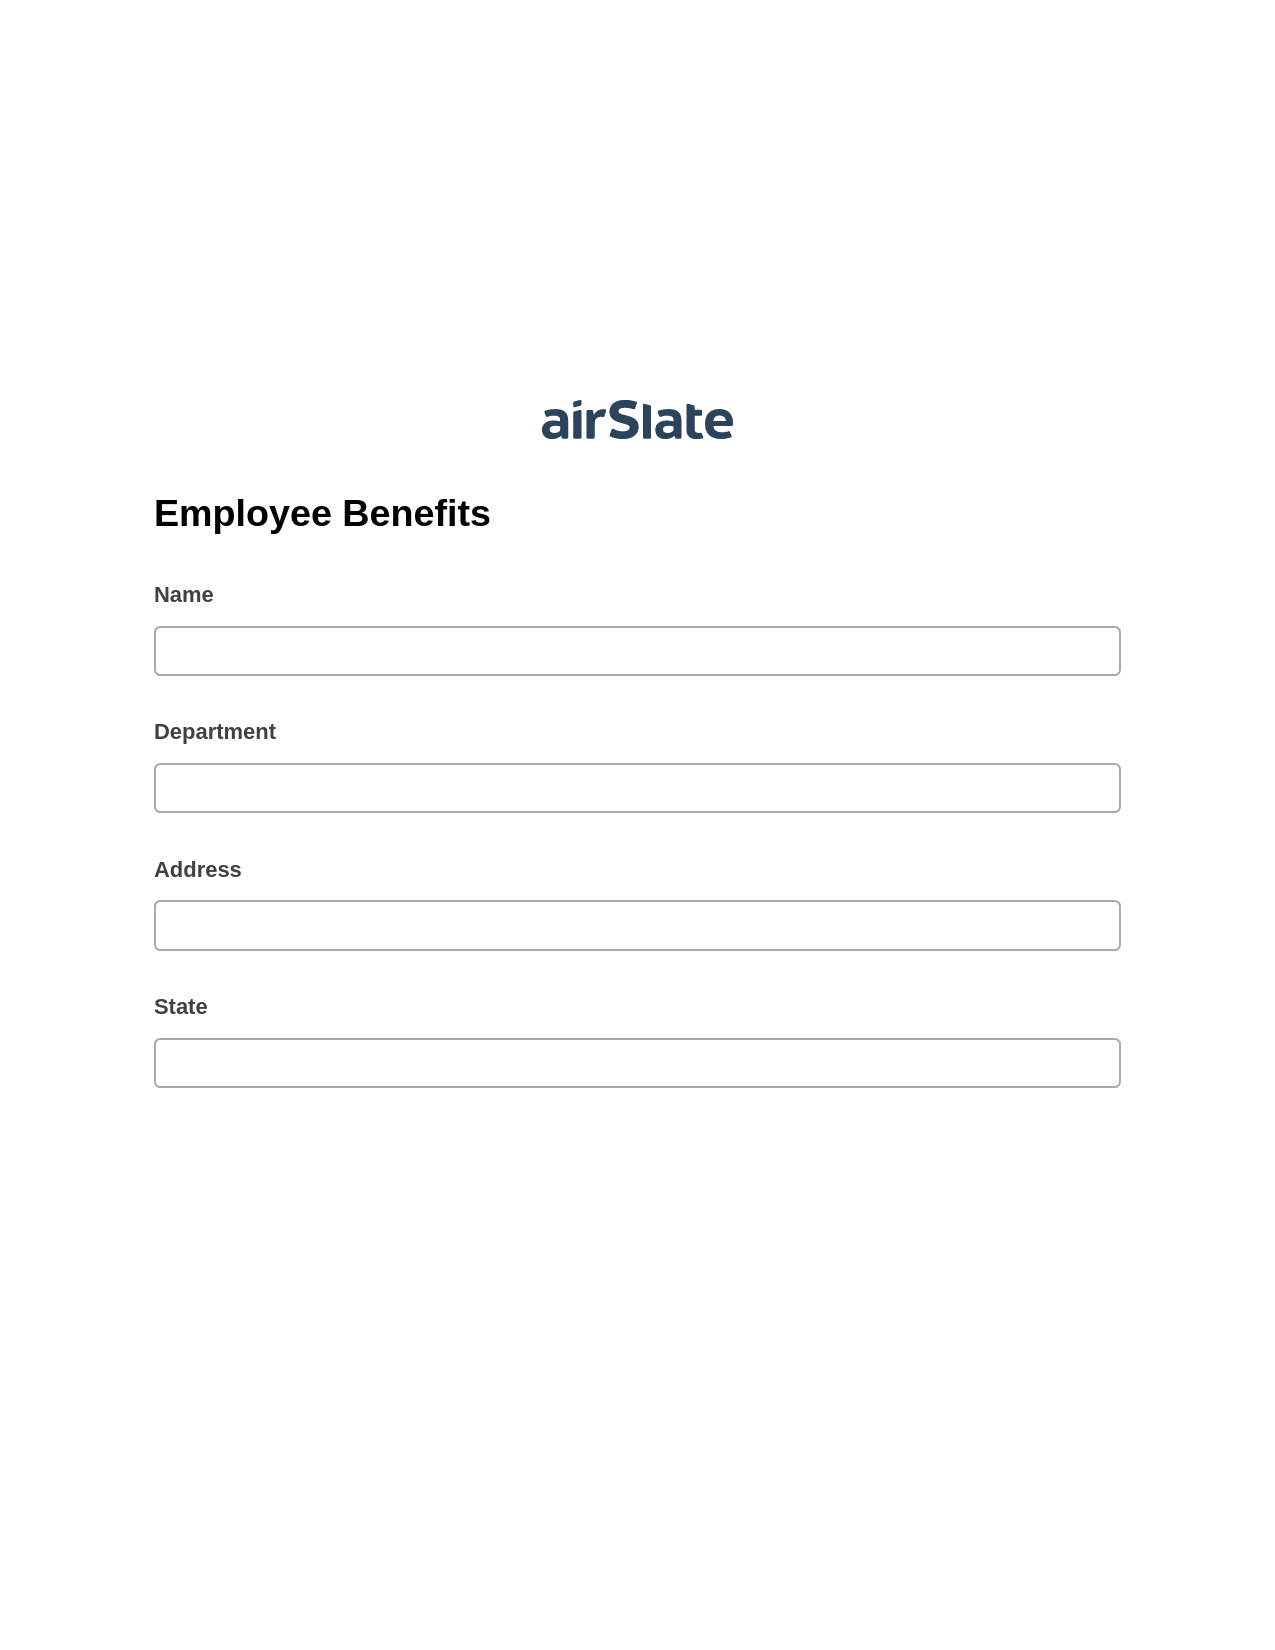 Multirole Employee Benefits Pre-fill from Salesforce Record Bot, Google Cloud Print Bot, Export to Excel 365 Bot